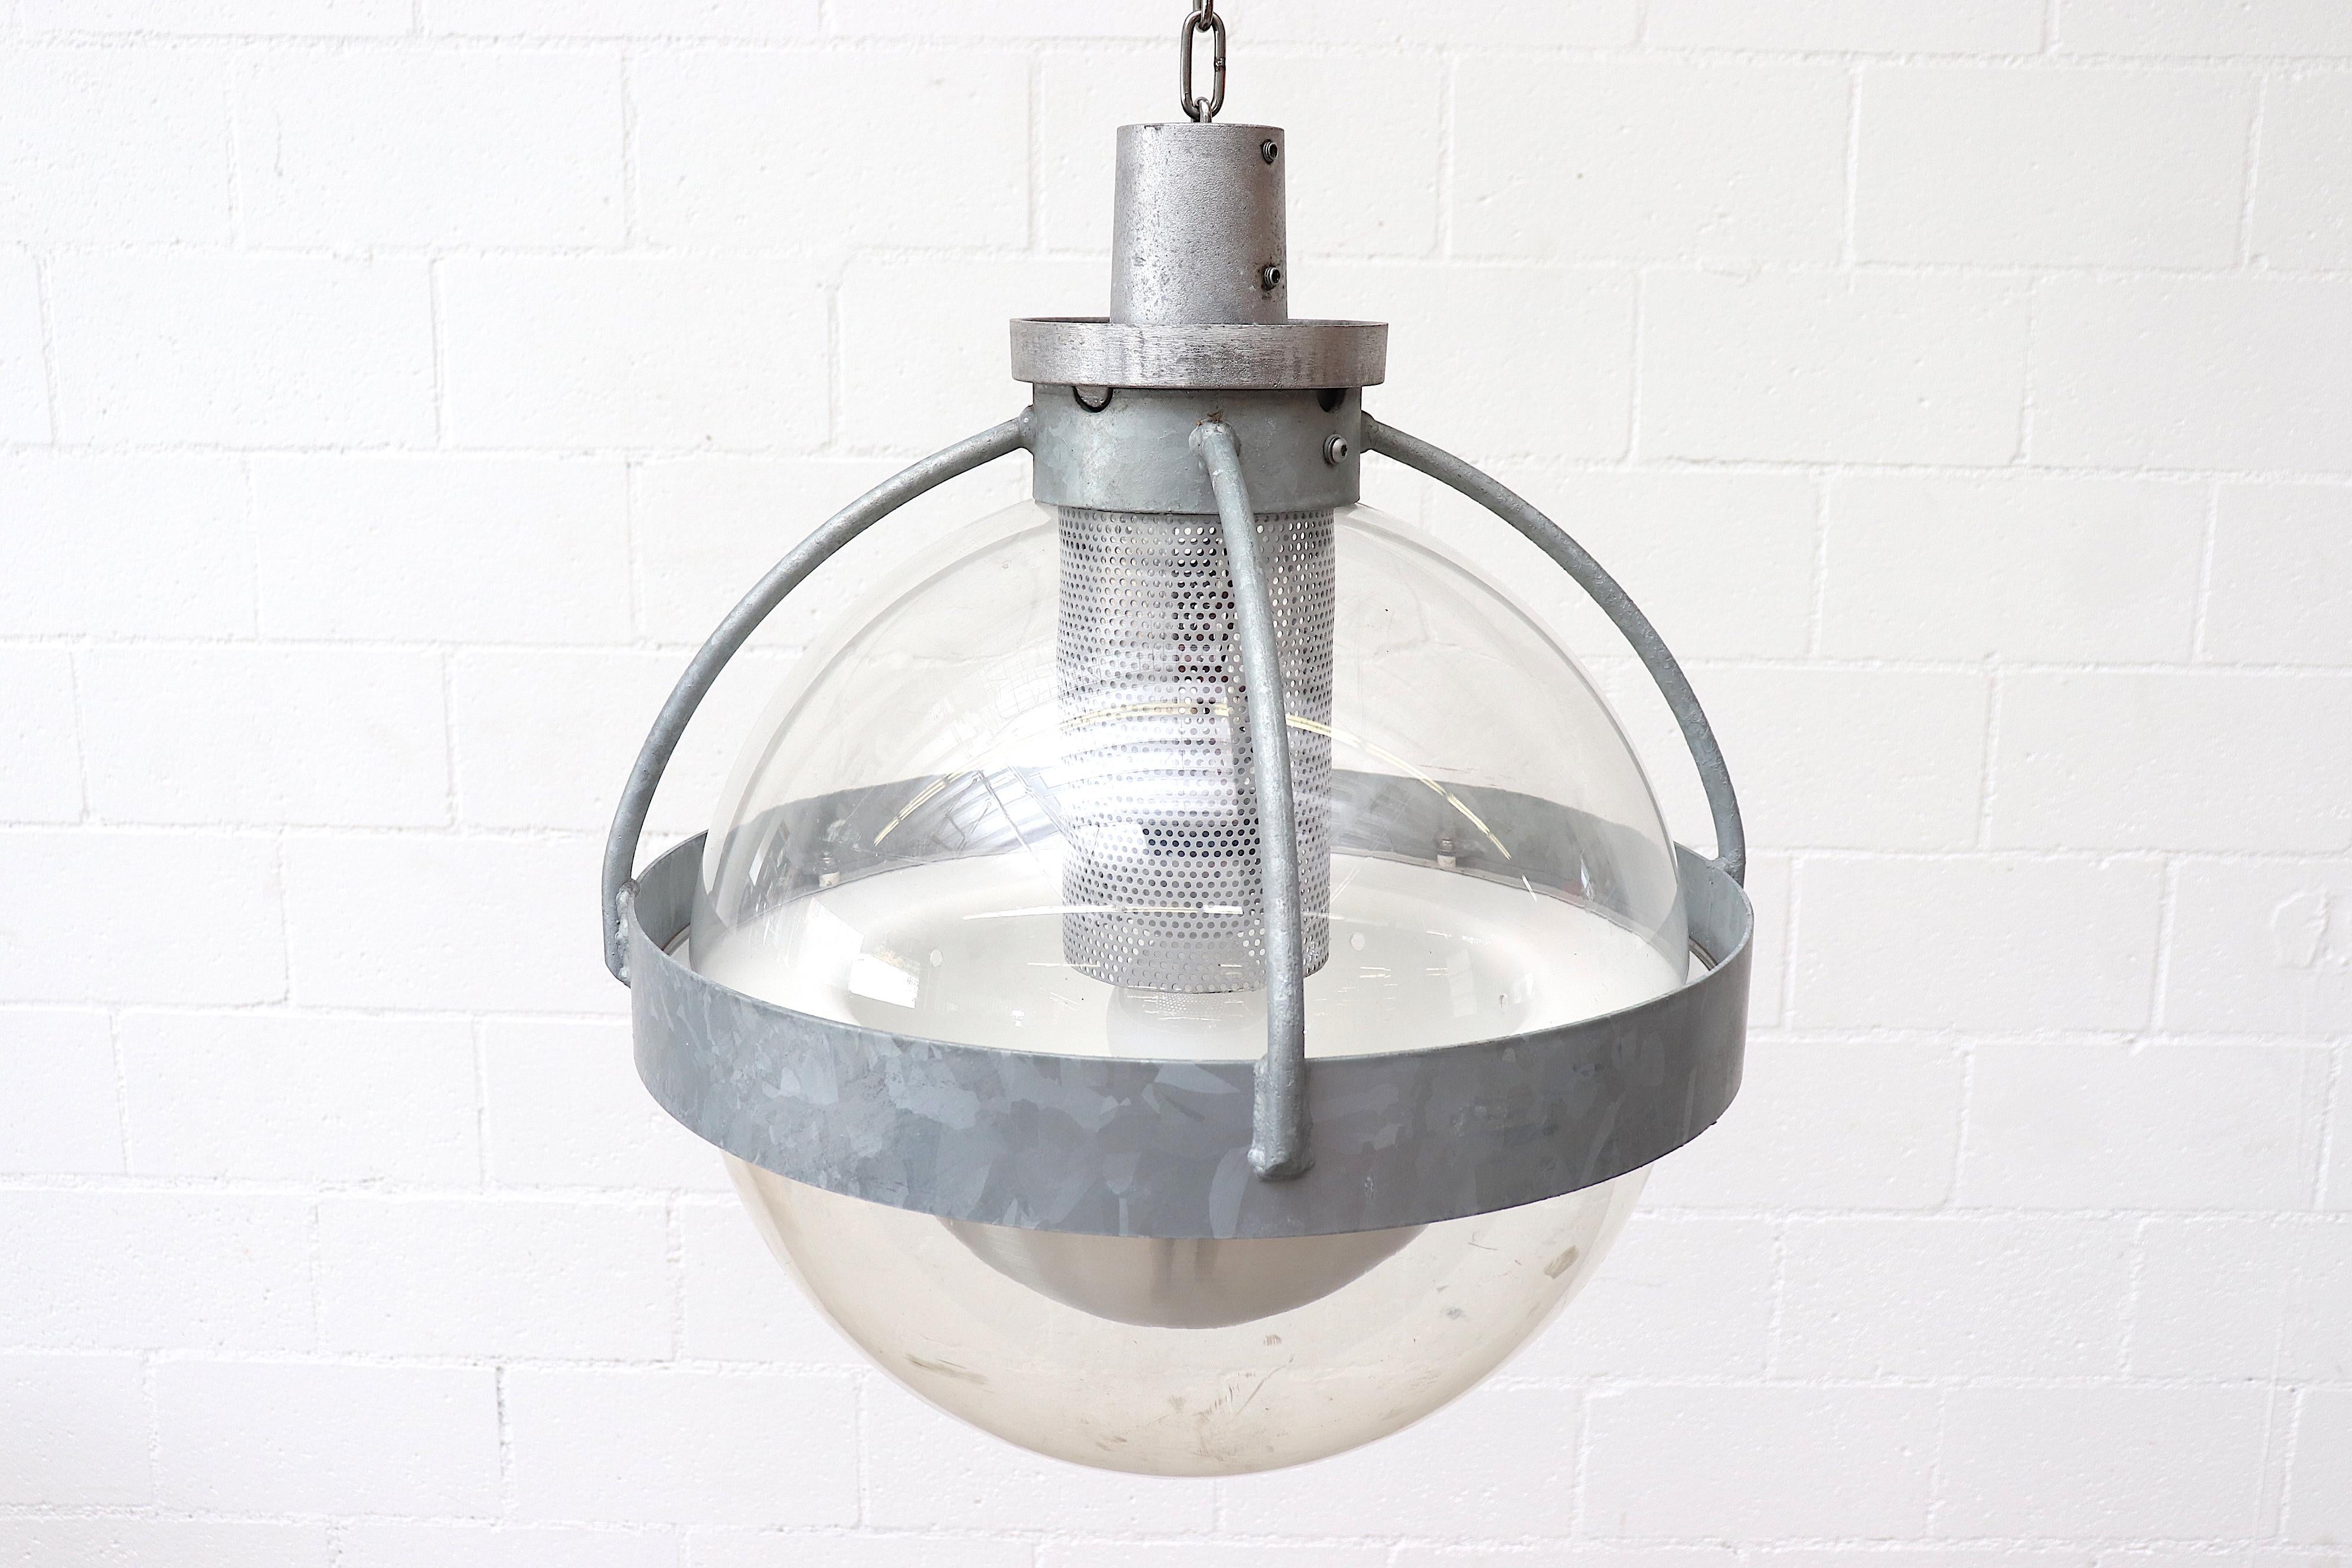 Midcentury industrial galvanized metal and acrylic globe ceiling lights. In original condition with visible wear and scratching. Heavy!! Individually priced.